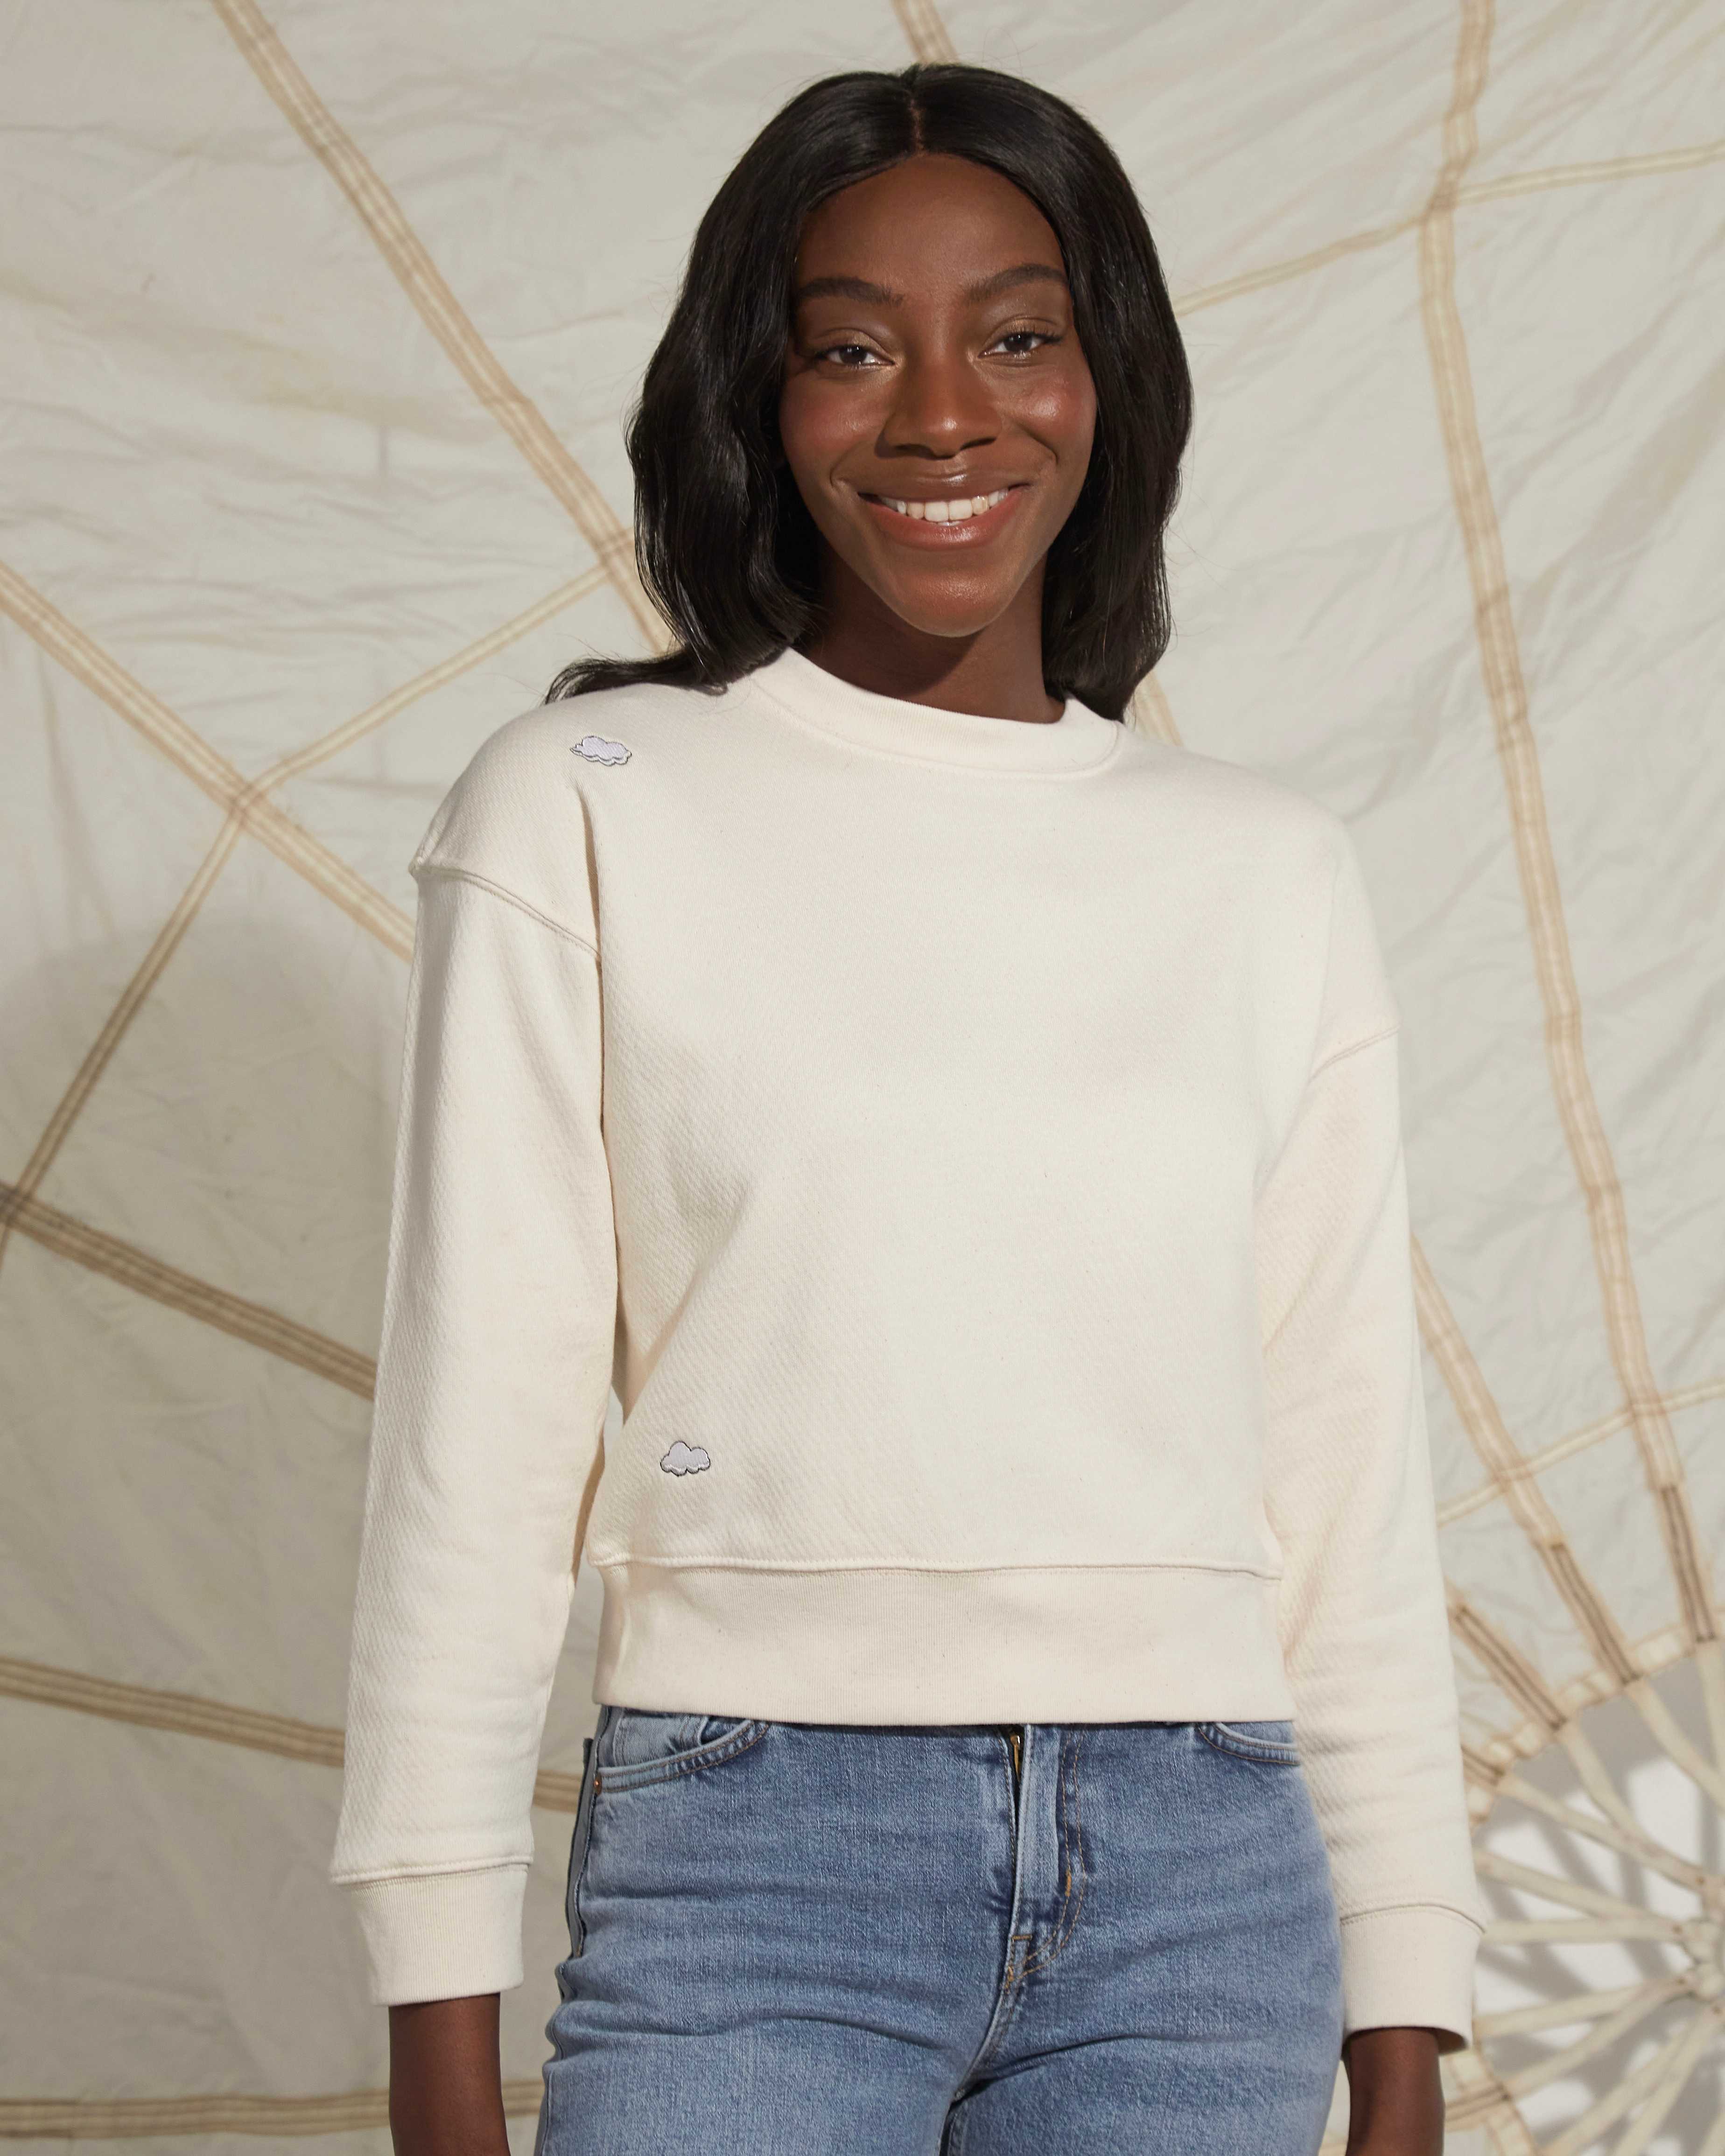 Women wearing a cream ingmarson sweatshirt with clouds embroidered and blue levis jeans posing infront of a parachute 